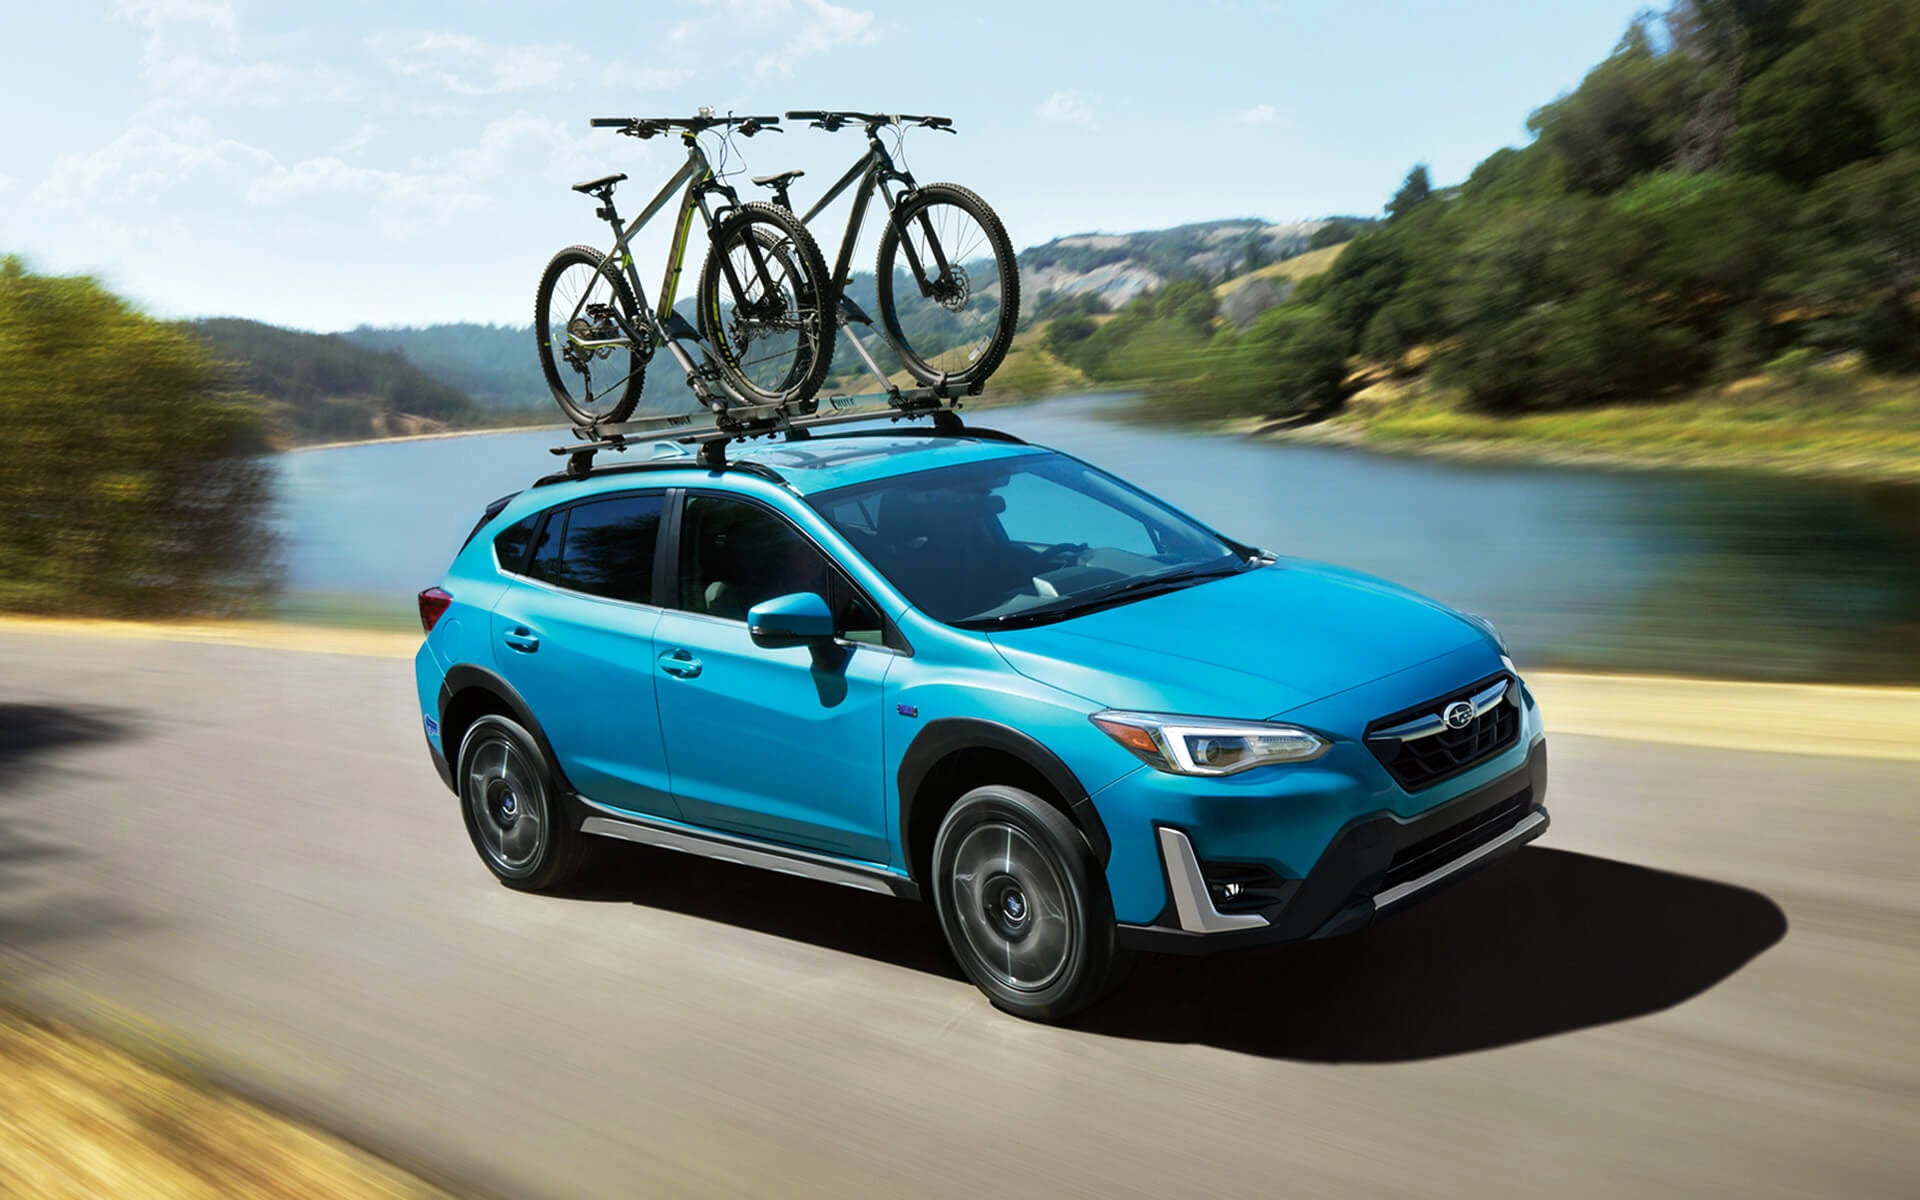 A blue Crosstrek Hybrid with two bicycles on its roof rack driving beside a river | All American Subaru of Old Bridge in Old Bridge NJ